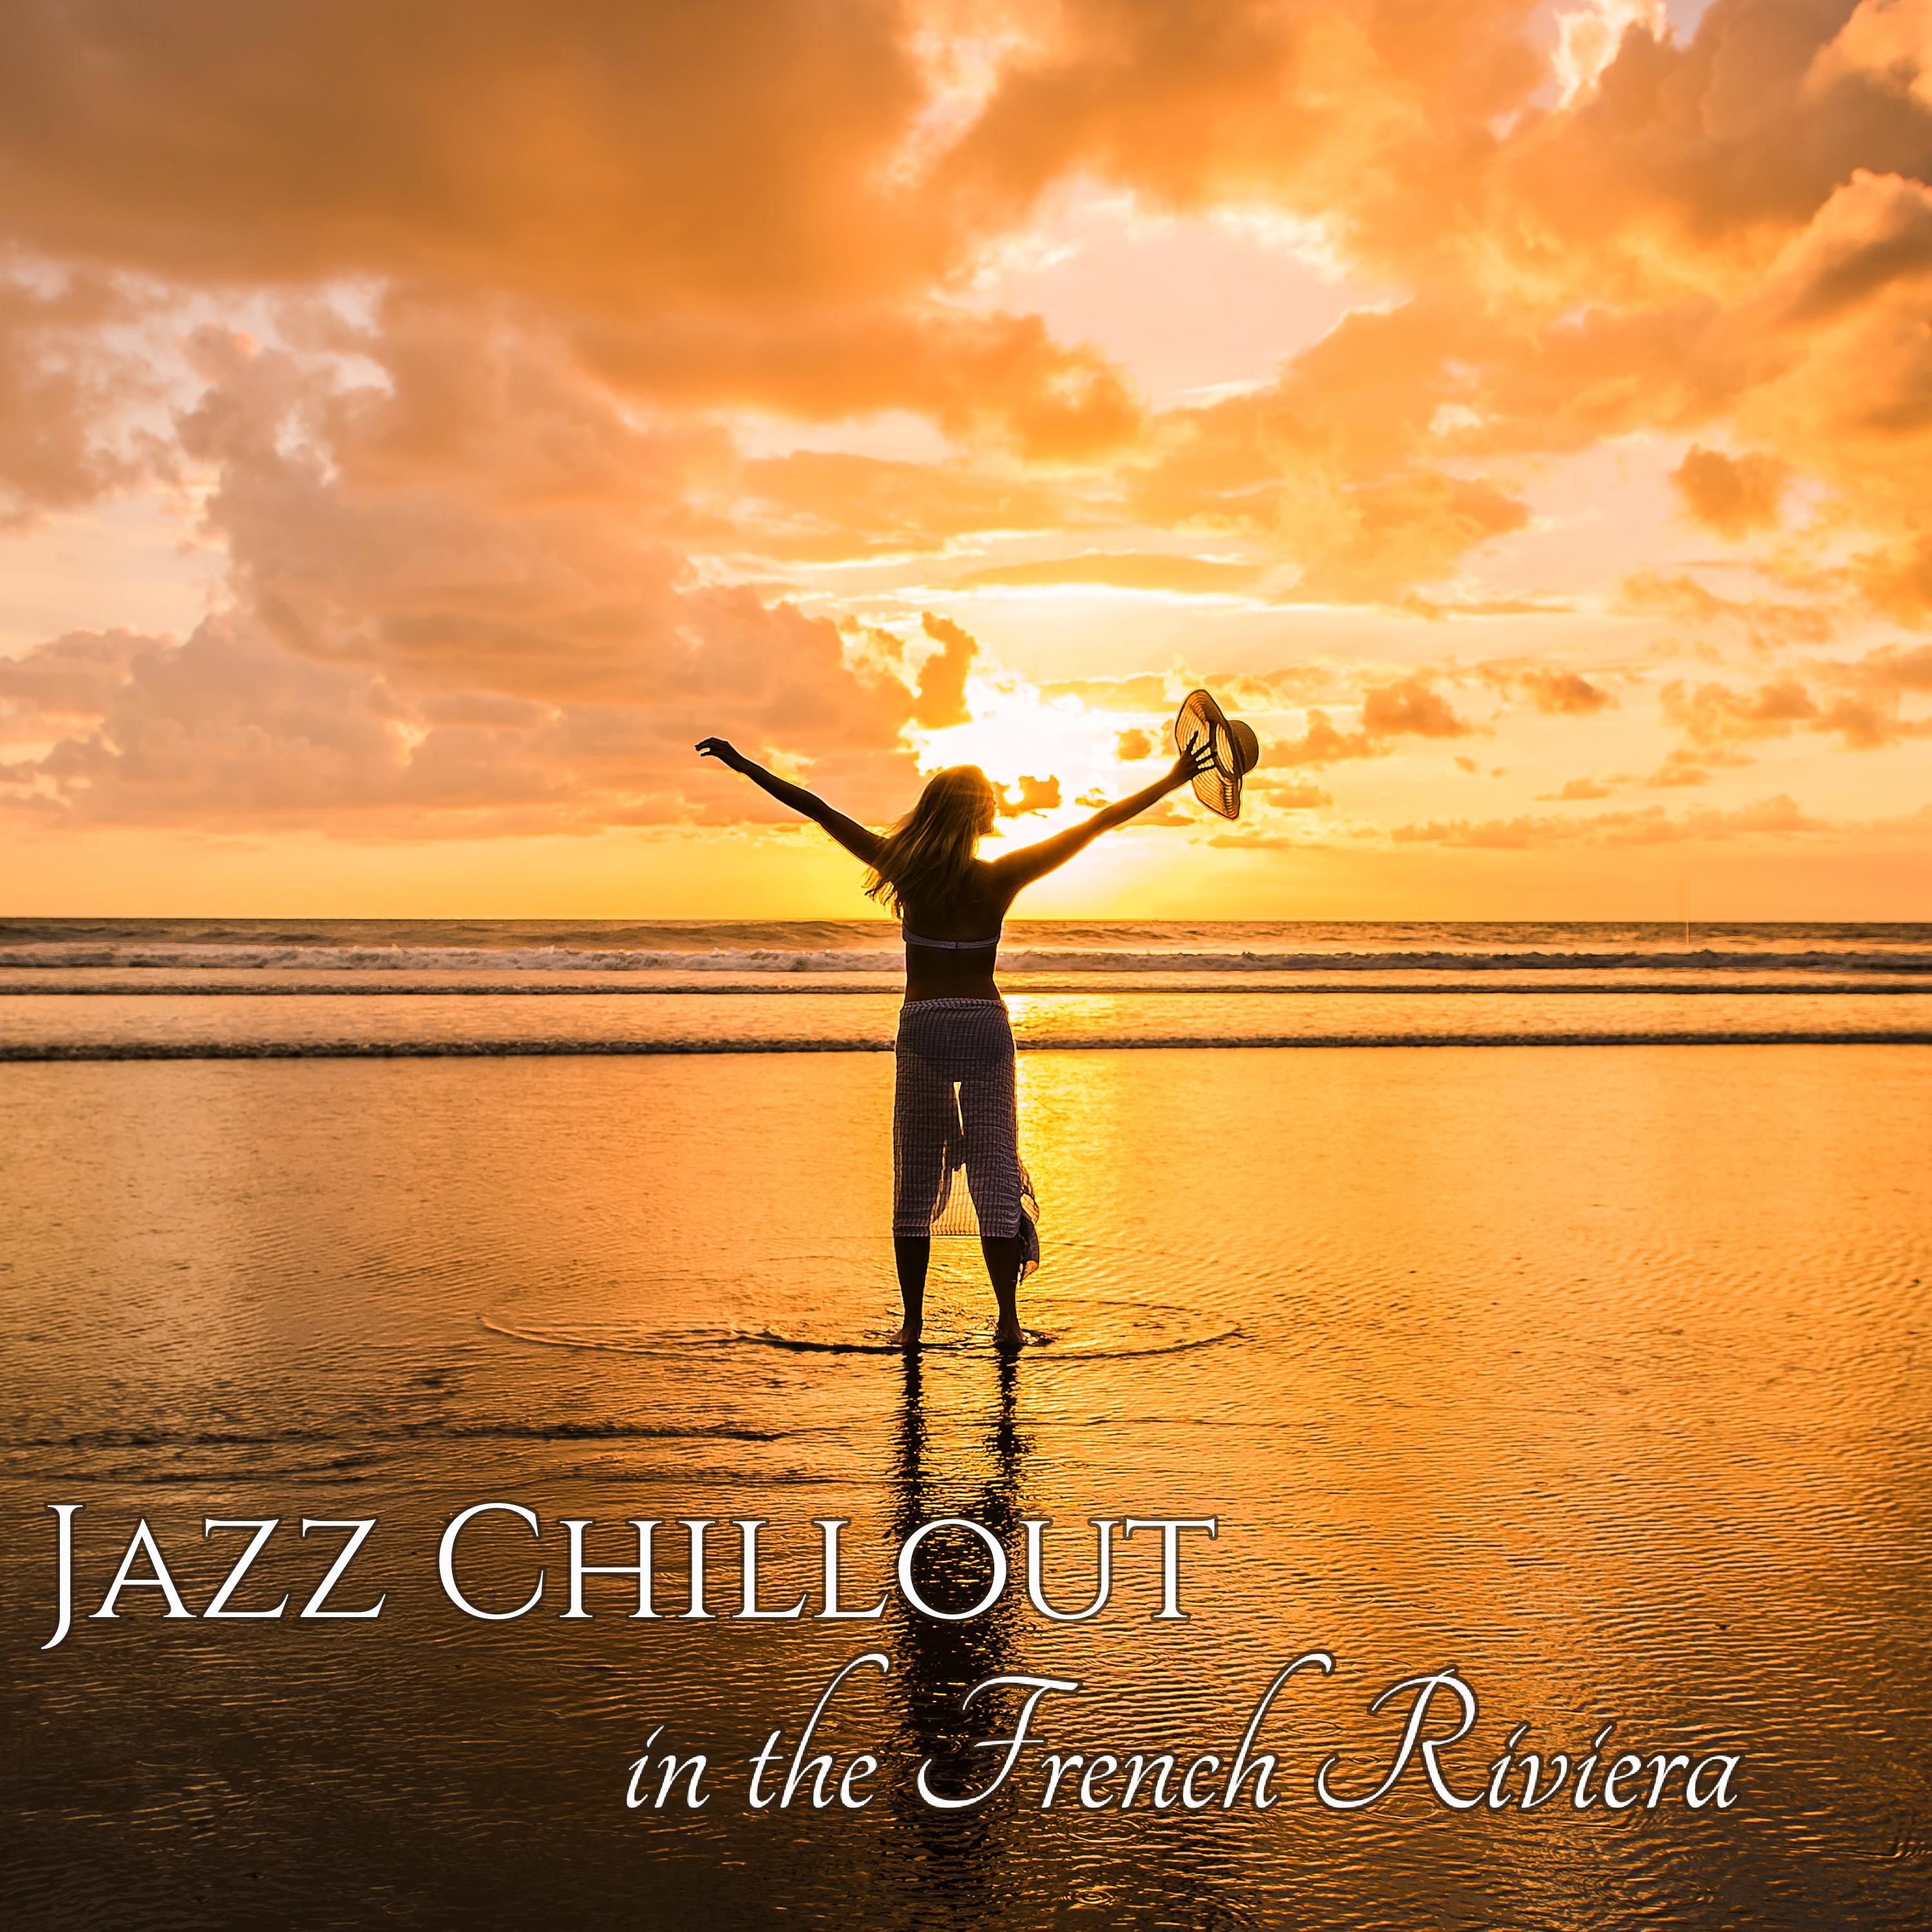 Jazz Chillout in the French Riviera  Easy Listening Jazz Chill for Beautiful Holidays in C te d' Azur at St Tropez Cafe